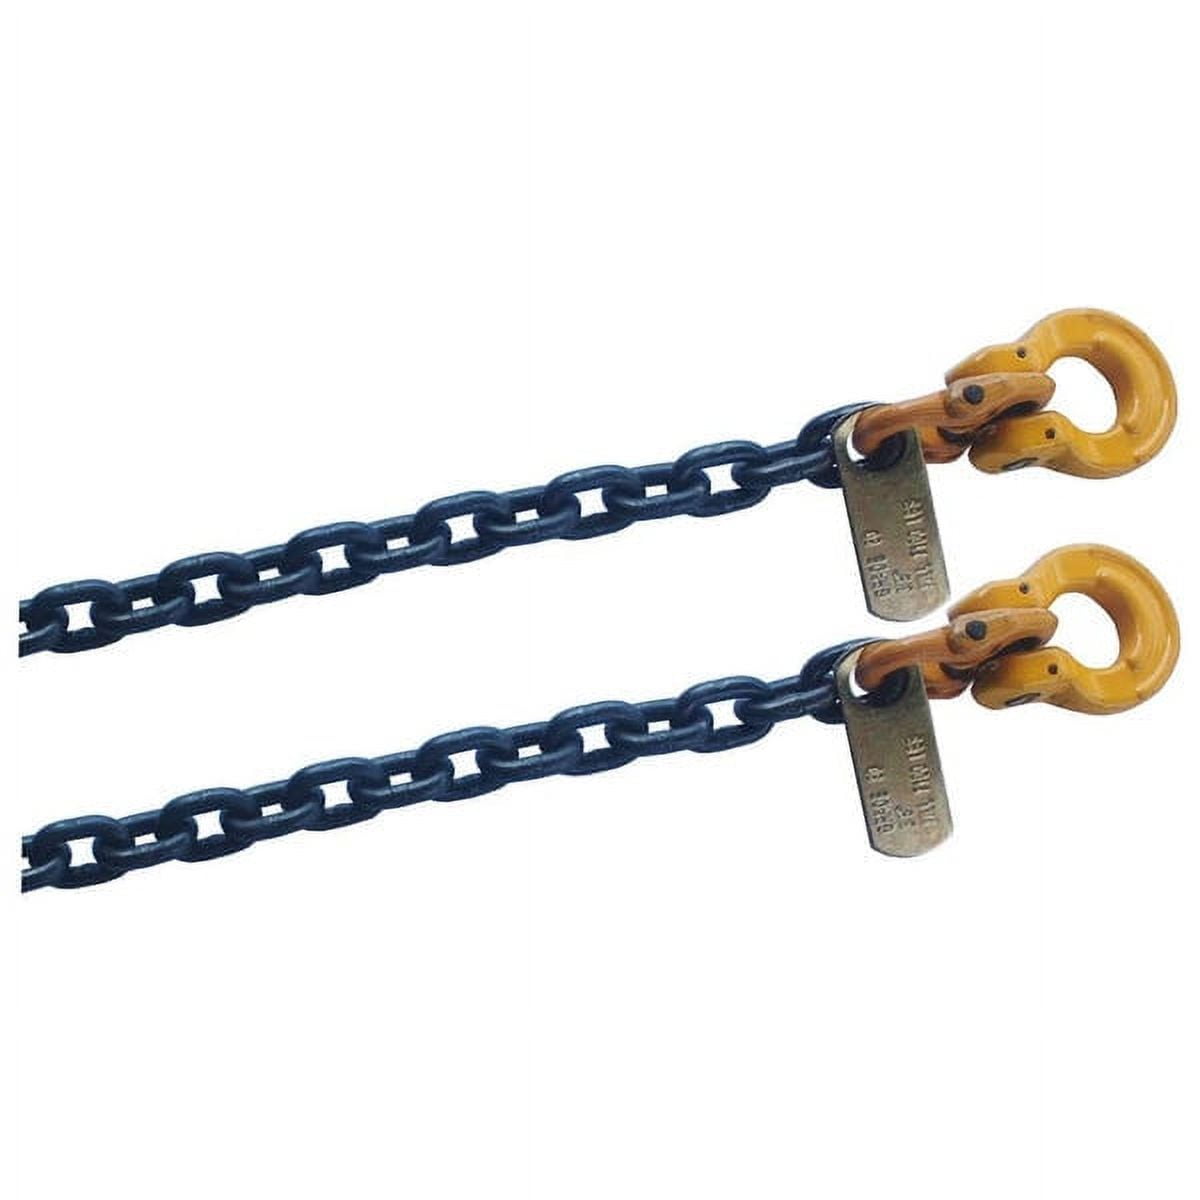 Stainless Steel 316 Chain 16mm (5/8) by the foot Medium Link Chain